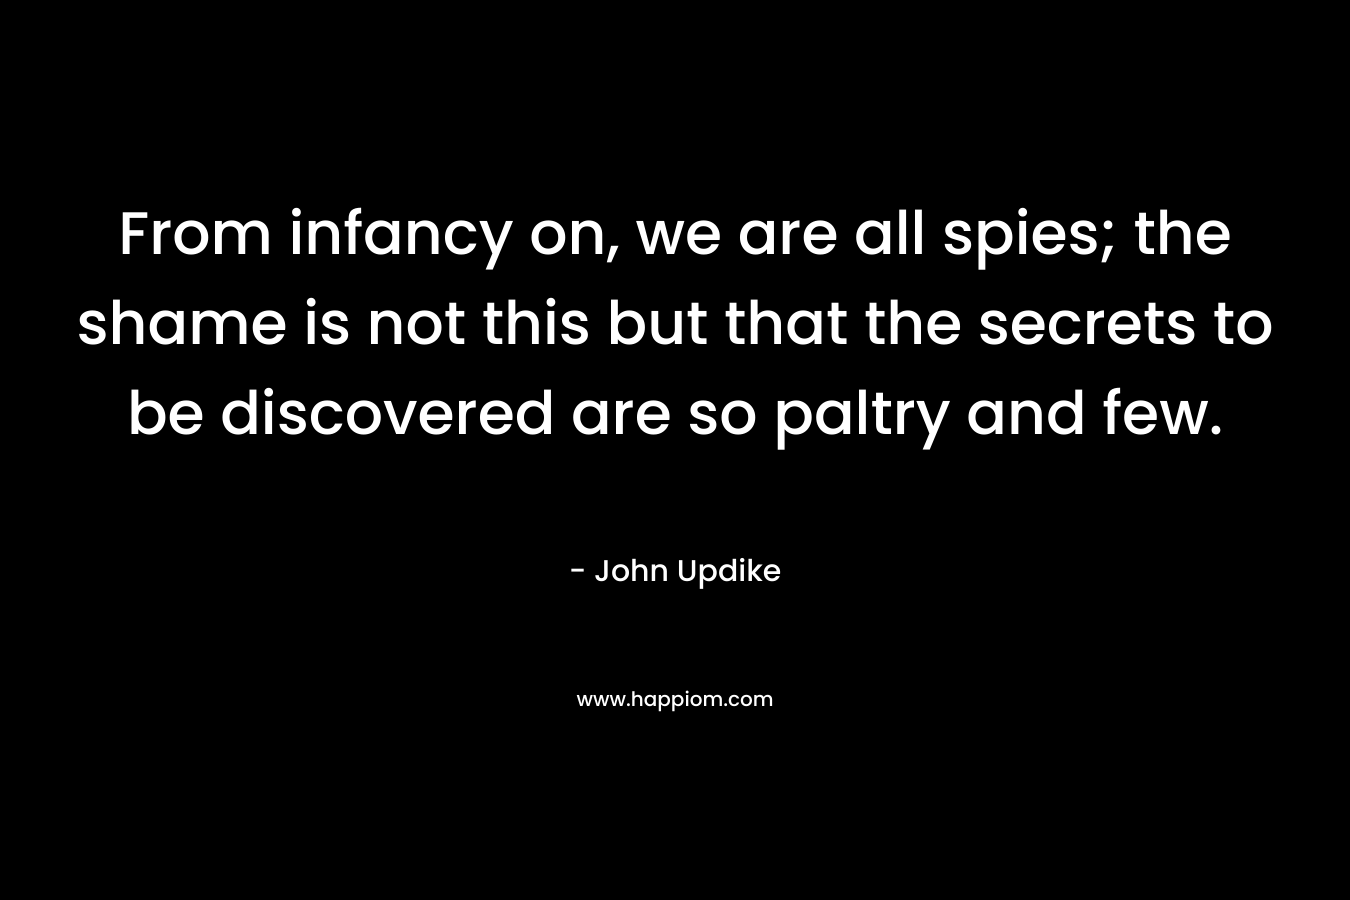 From infancy on, we are all spies; the shame is not this but that the secrets to be discovered are so paltry and few. 